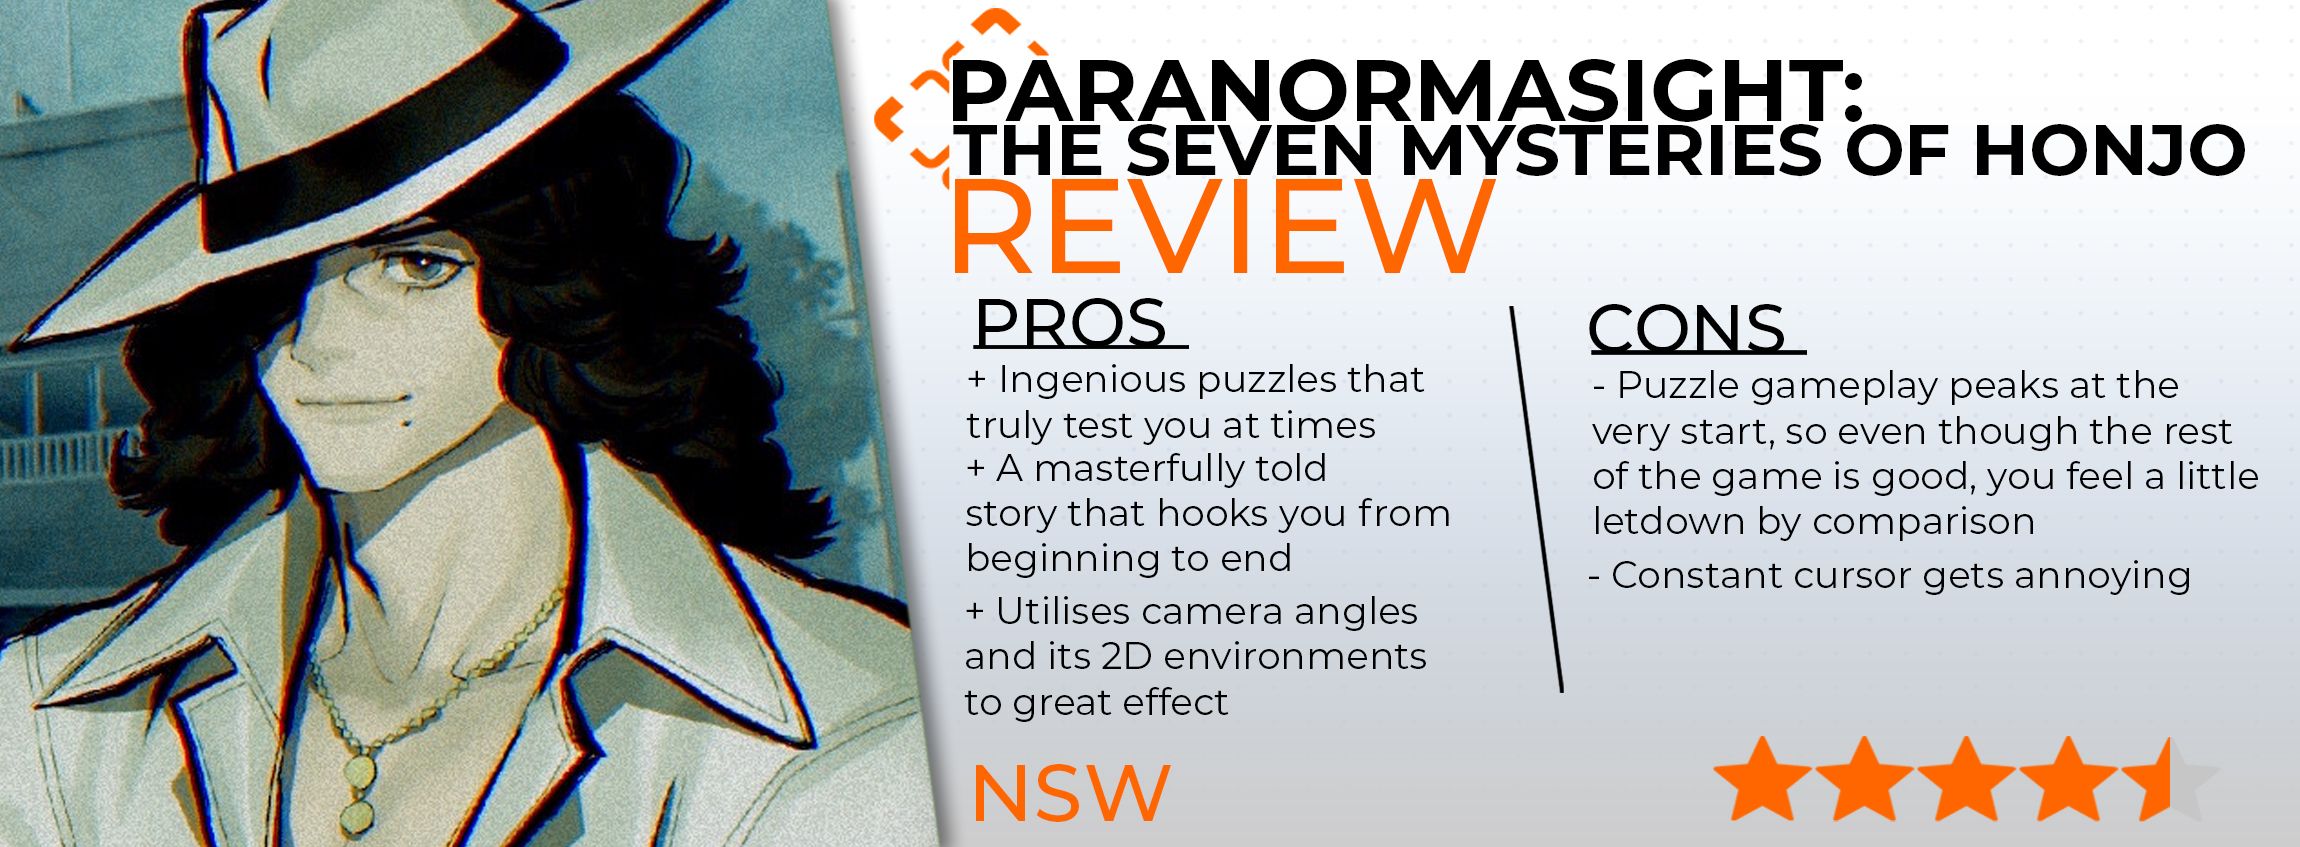 Paranormasight The Seven Mysteries of Honjo review card that scores it 4.5/5